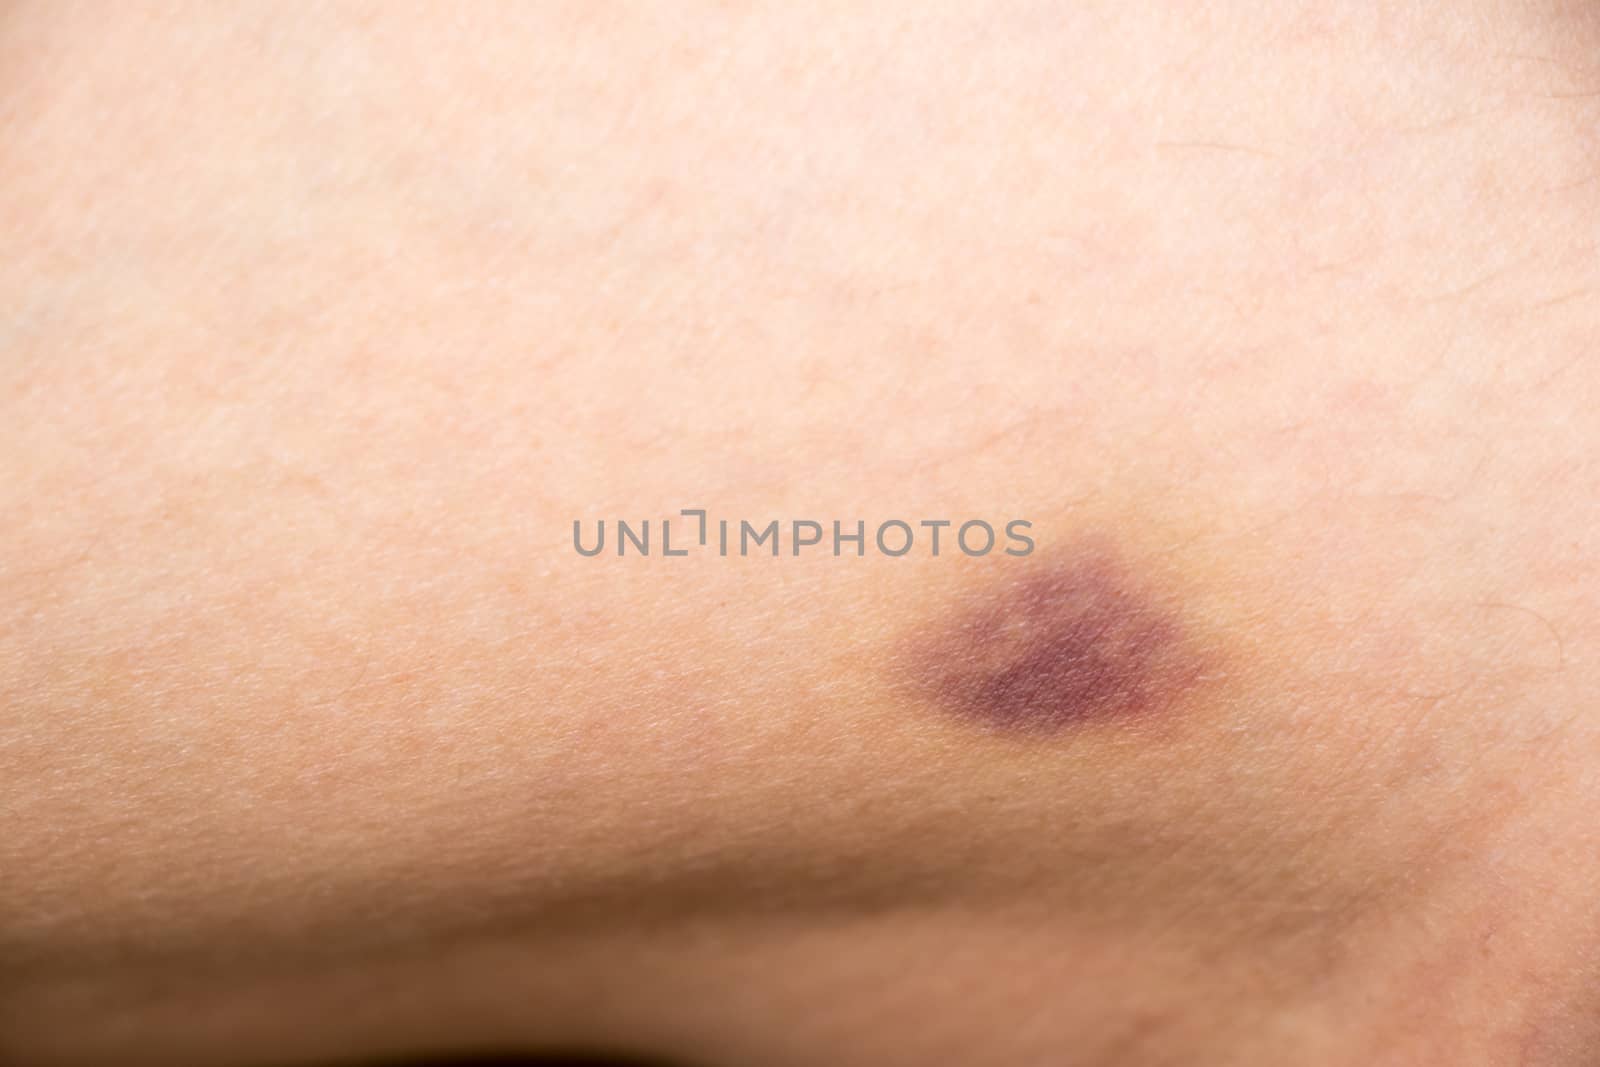 Closed up of bruised injury on woman leg background by Hengpattanapong